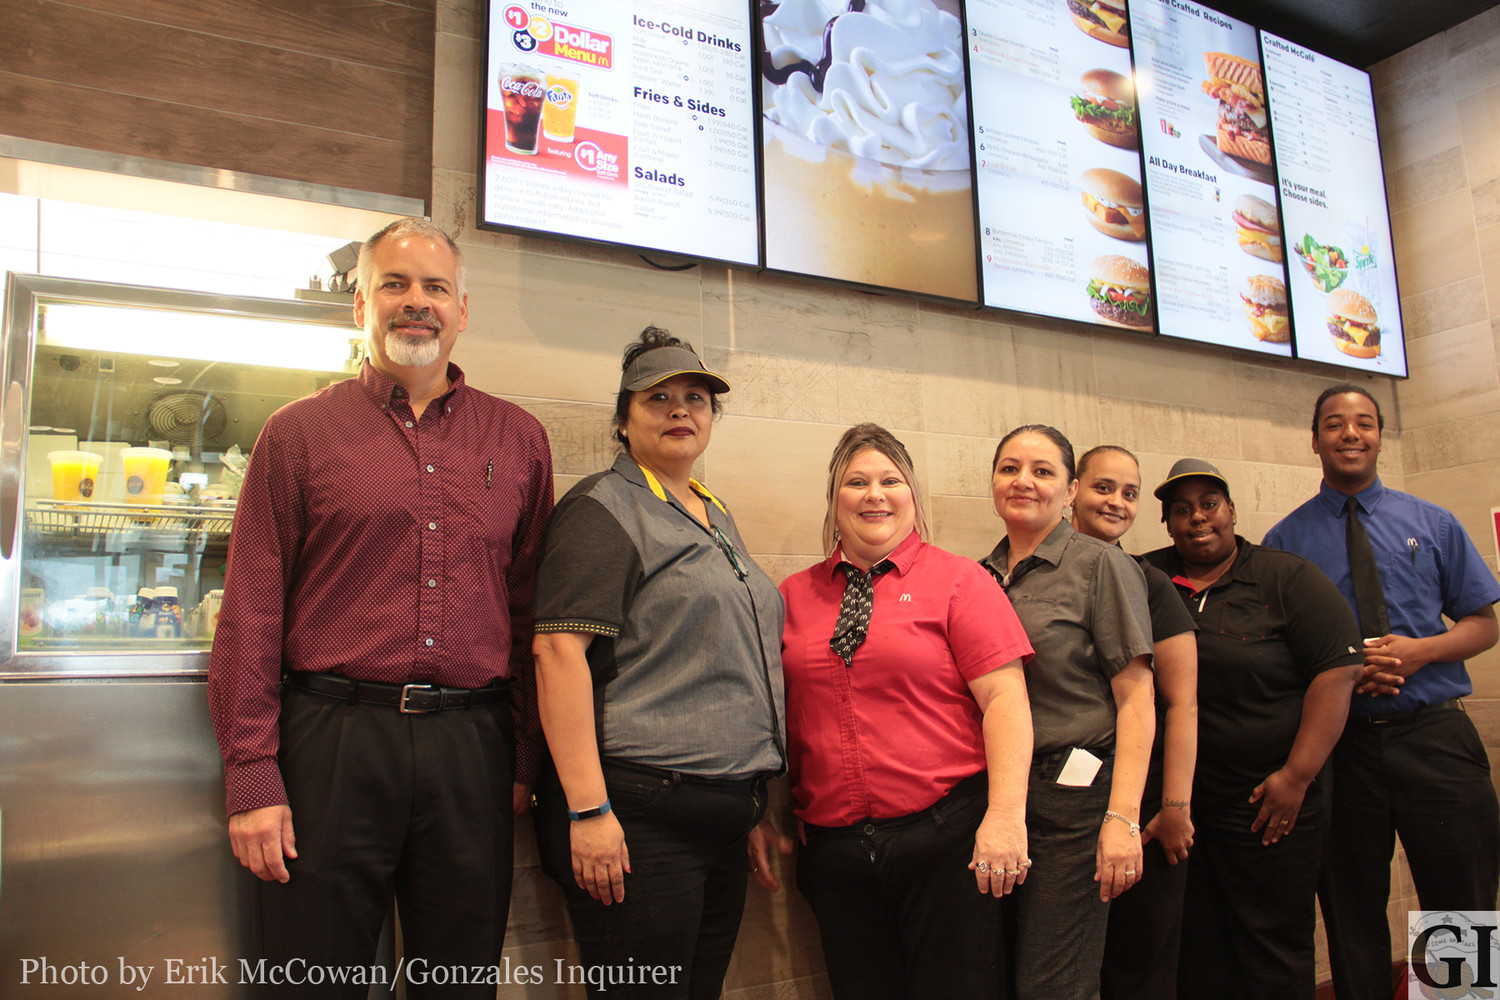 Store owner Robert Wezeman, far left, and his crew are guiding the Gonzales McDonald's into uncharted territory with a new system that offers customer convenience and more menu choices than ever.